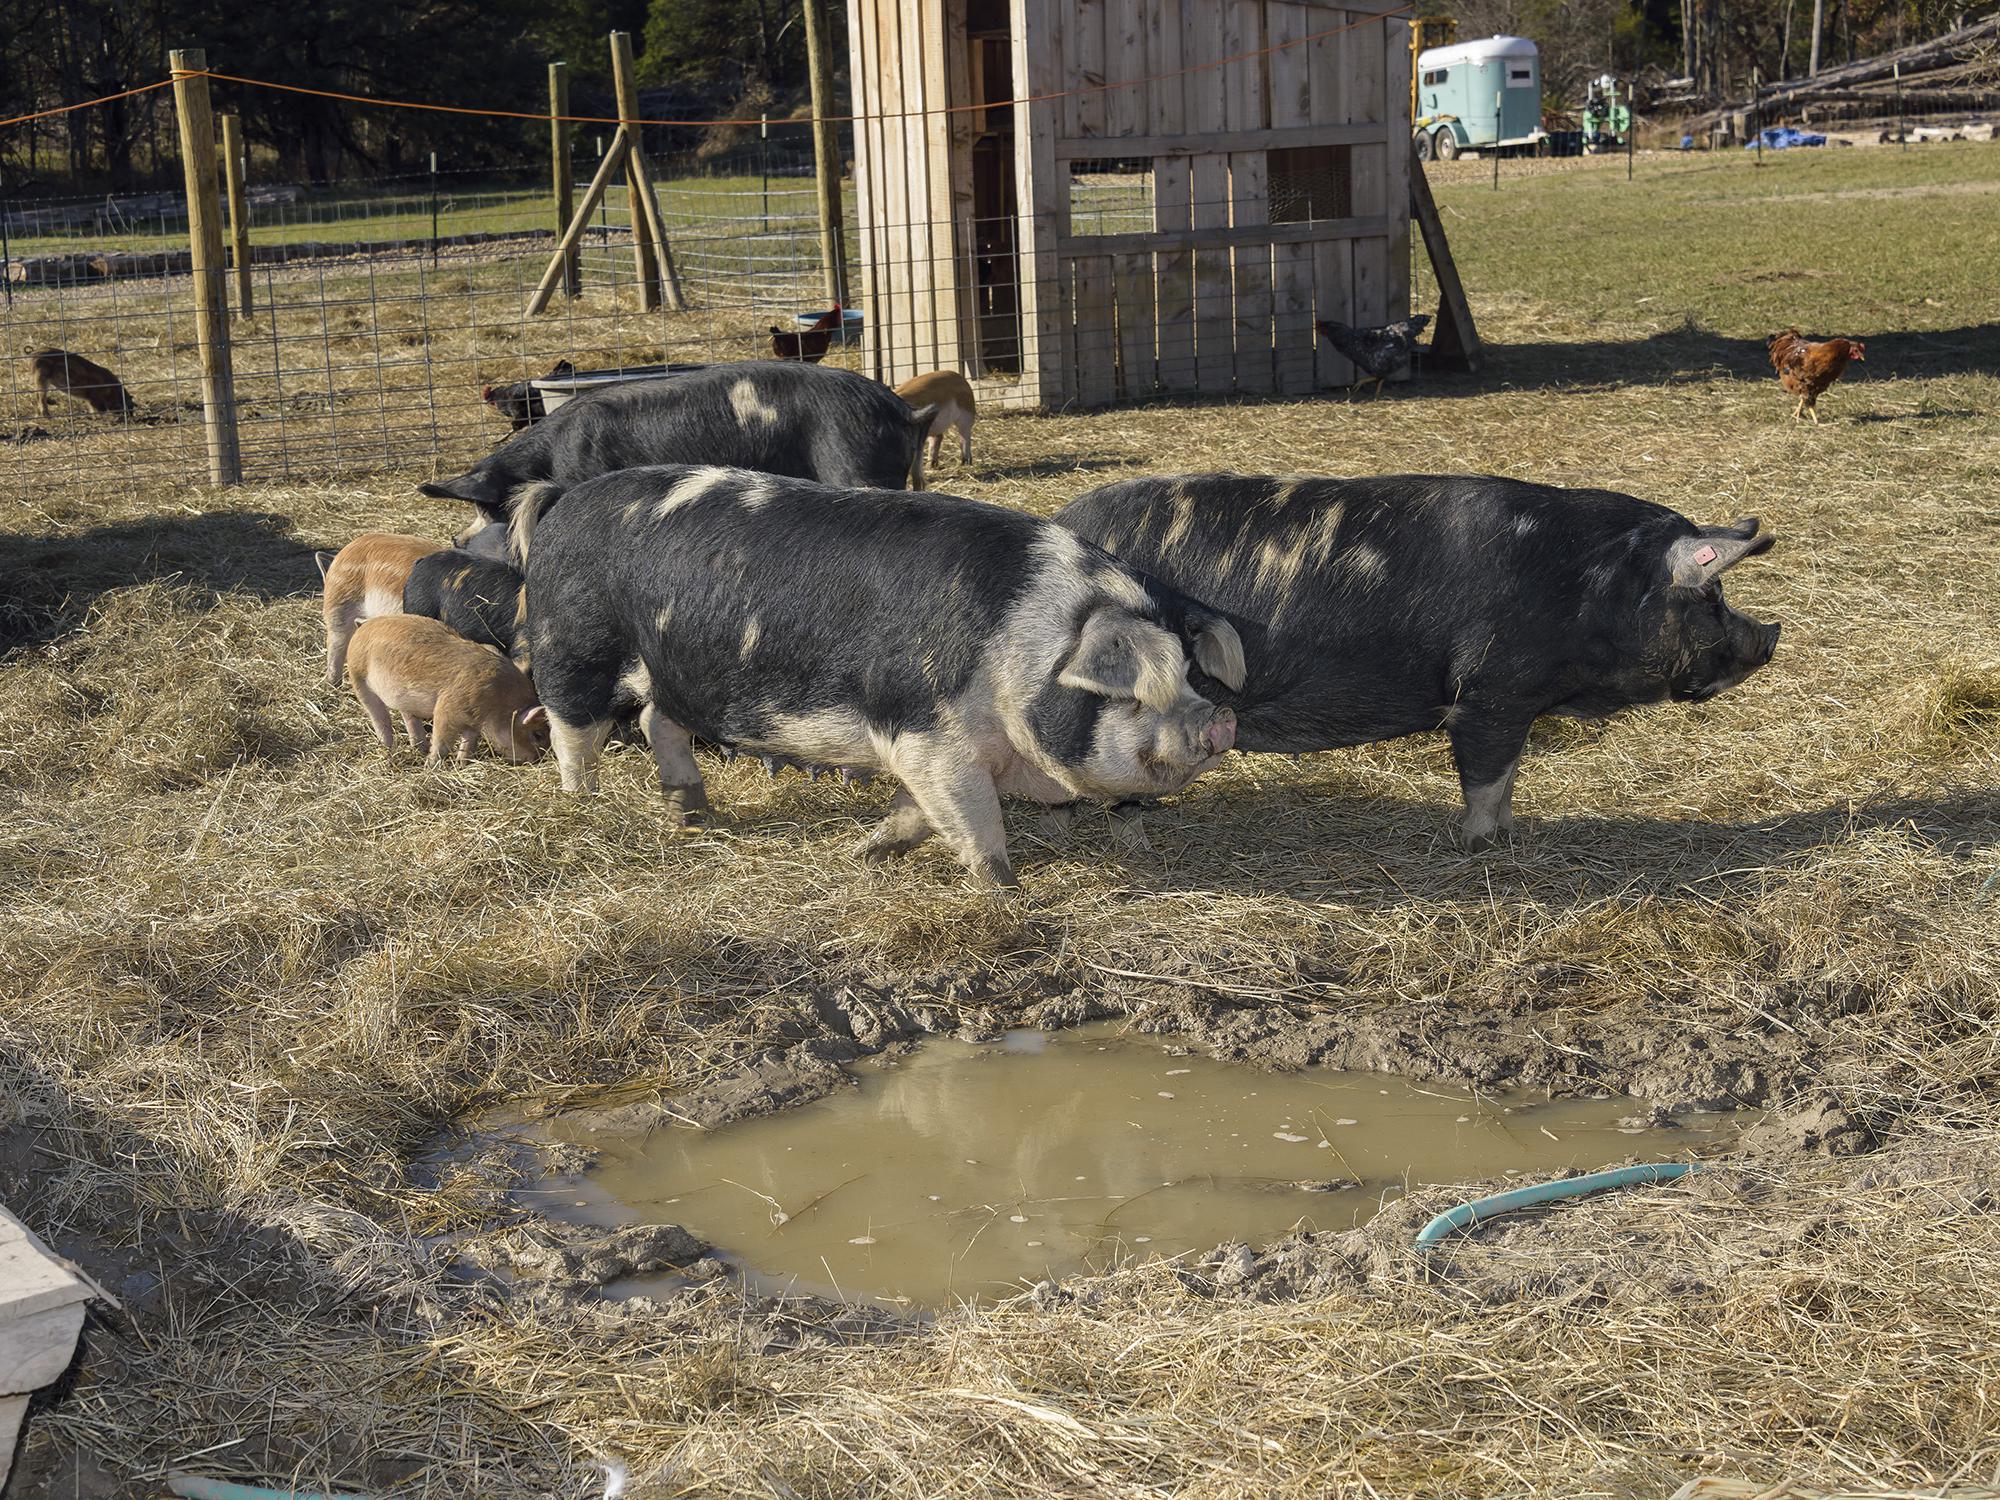 Pigs and hogs feed at Palo Alto Farms in West Point, Mississippi in this file photo. Consumer preference is one reason interest has been growing in people in the state raising pigs on pastureland for their own consumption. (File photo by MSU Ag Communications/Kevin Hudson)